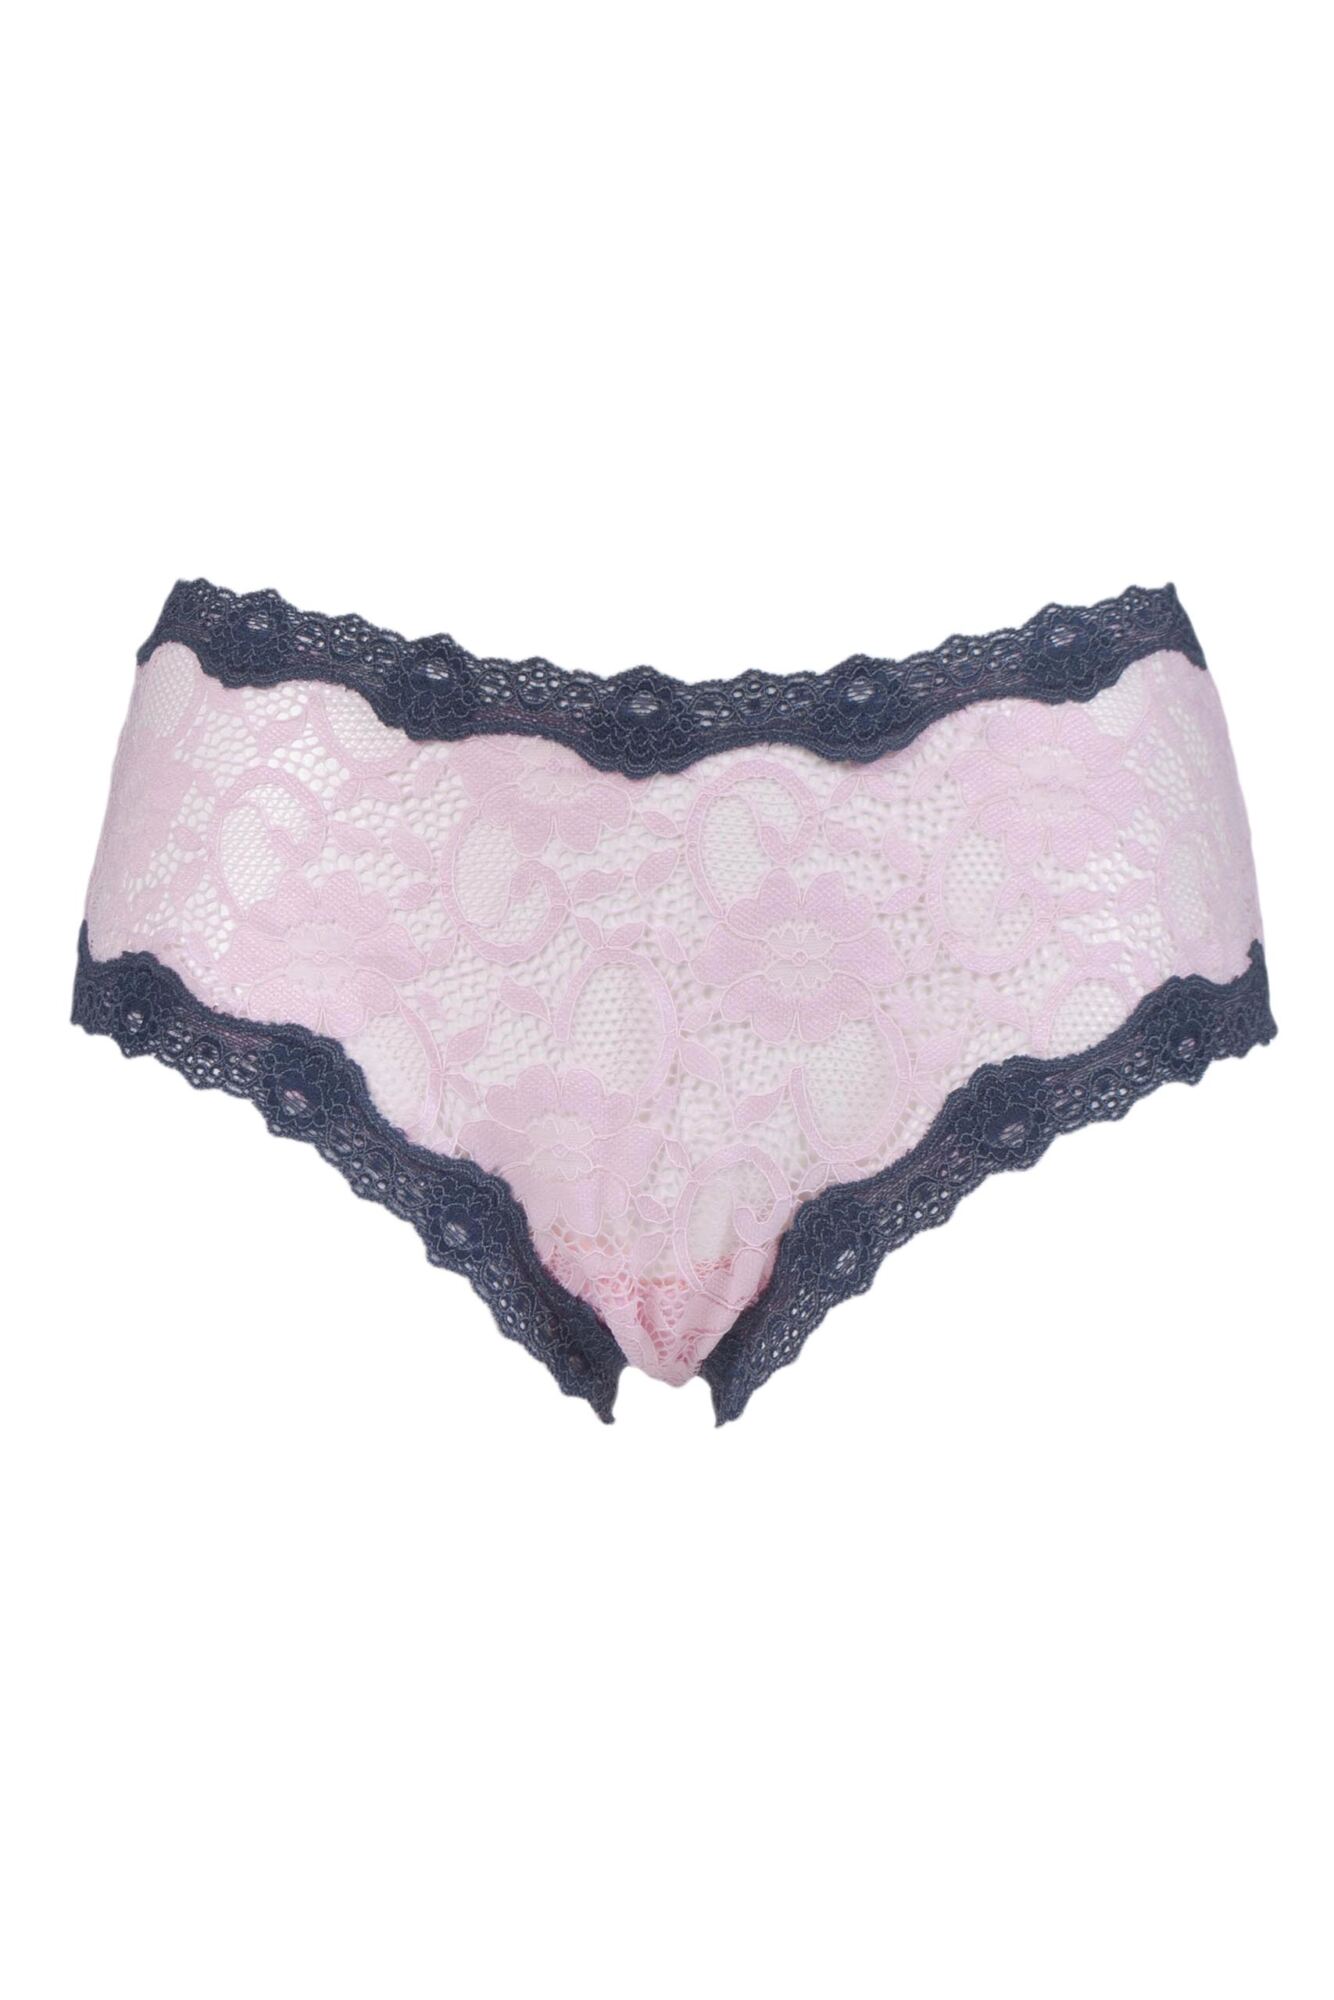 1 Pair 'Passionate In Pink' Border Lace Classic Knicker Ladies - Kinky Knickers